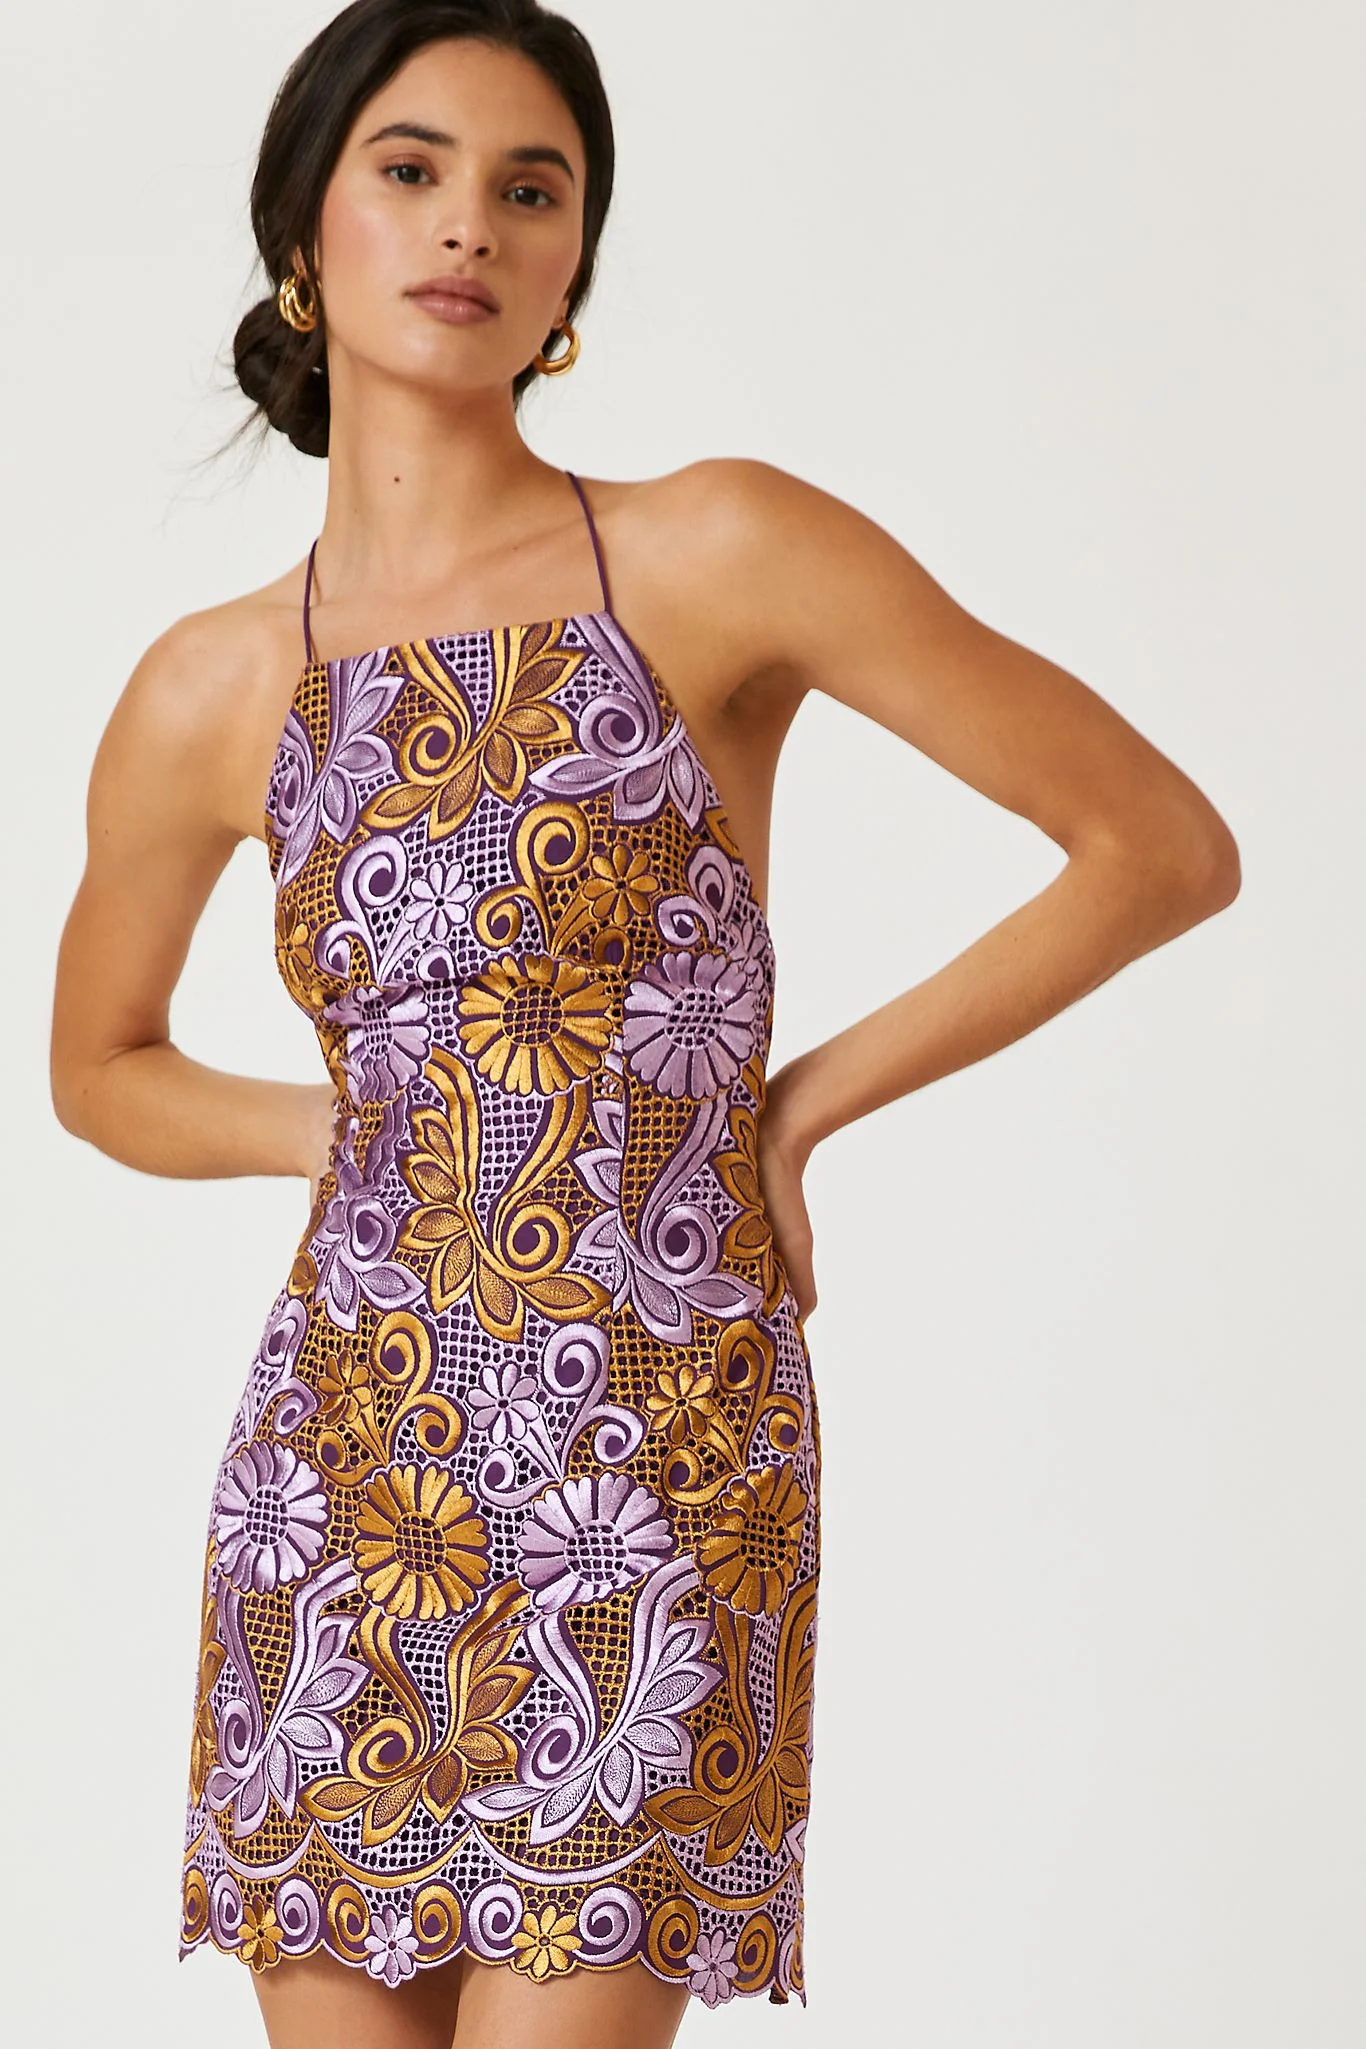 By Anthropologie Halter Keyhole Fit & Flare Mini Dress  Anthropologie Japan  - Women's Clothing, Accessories & Home